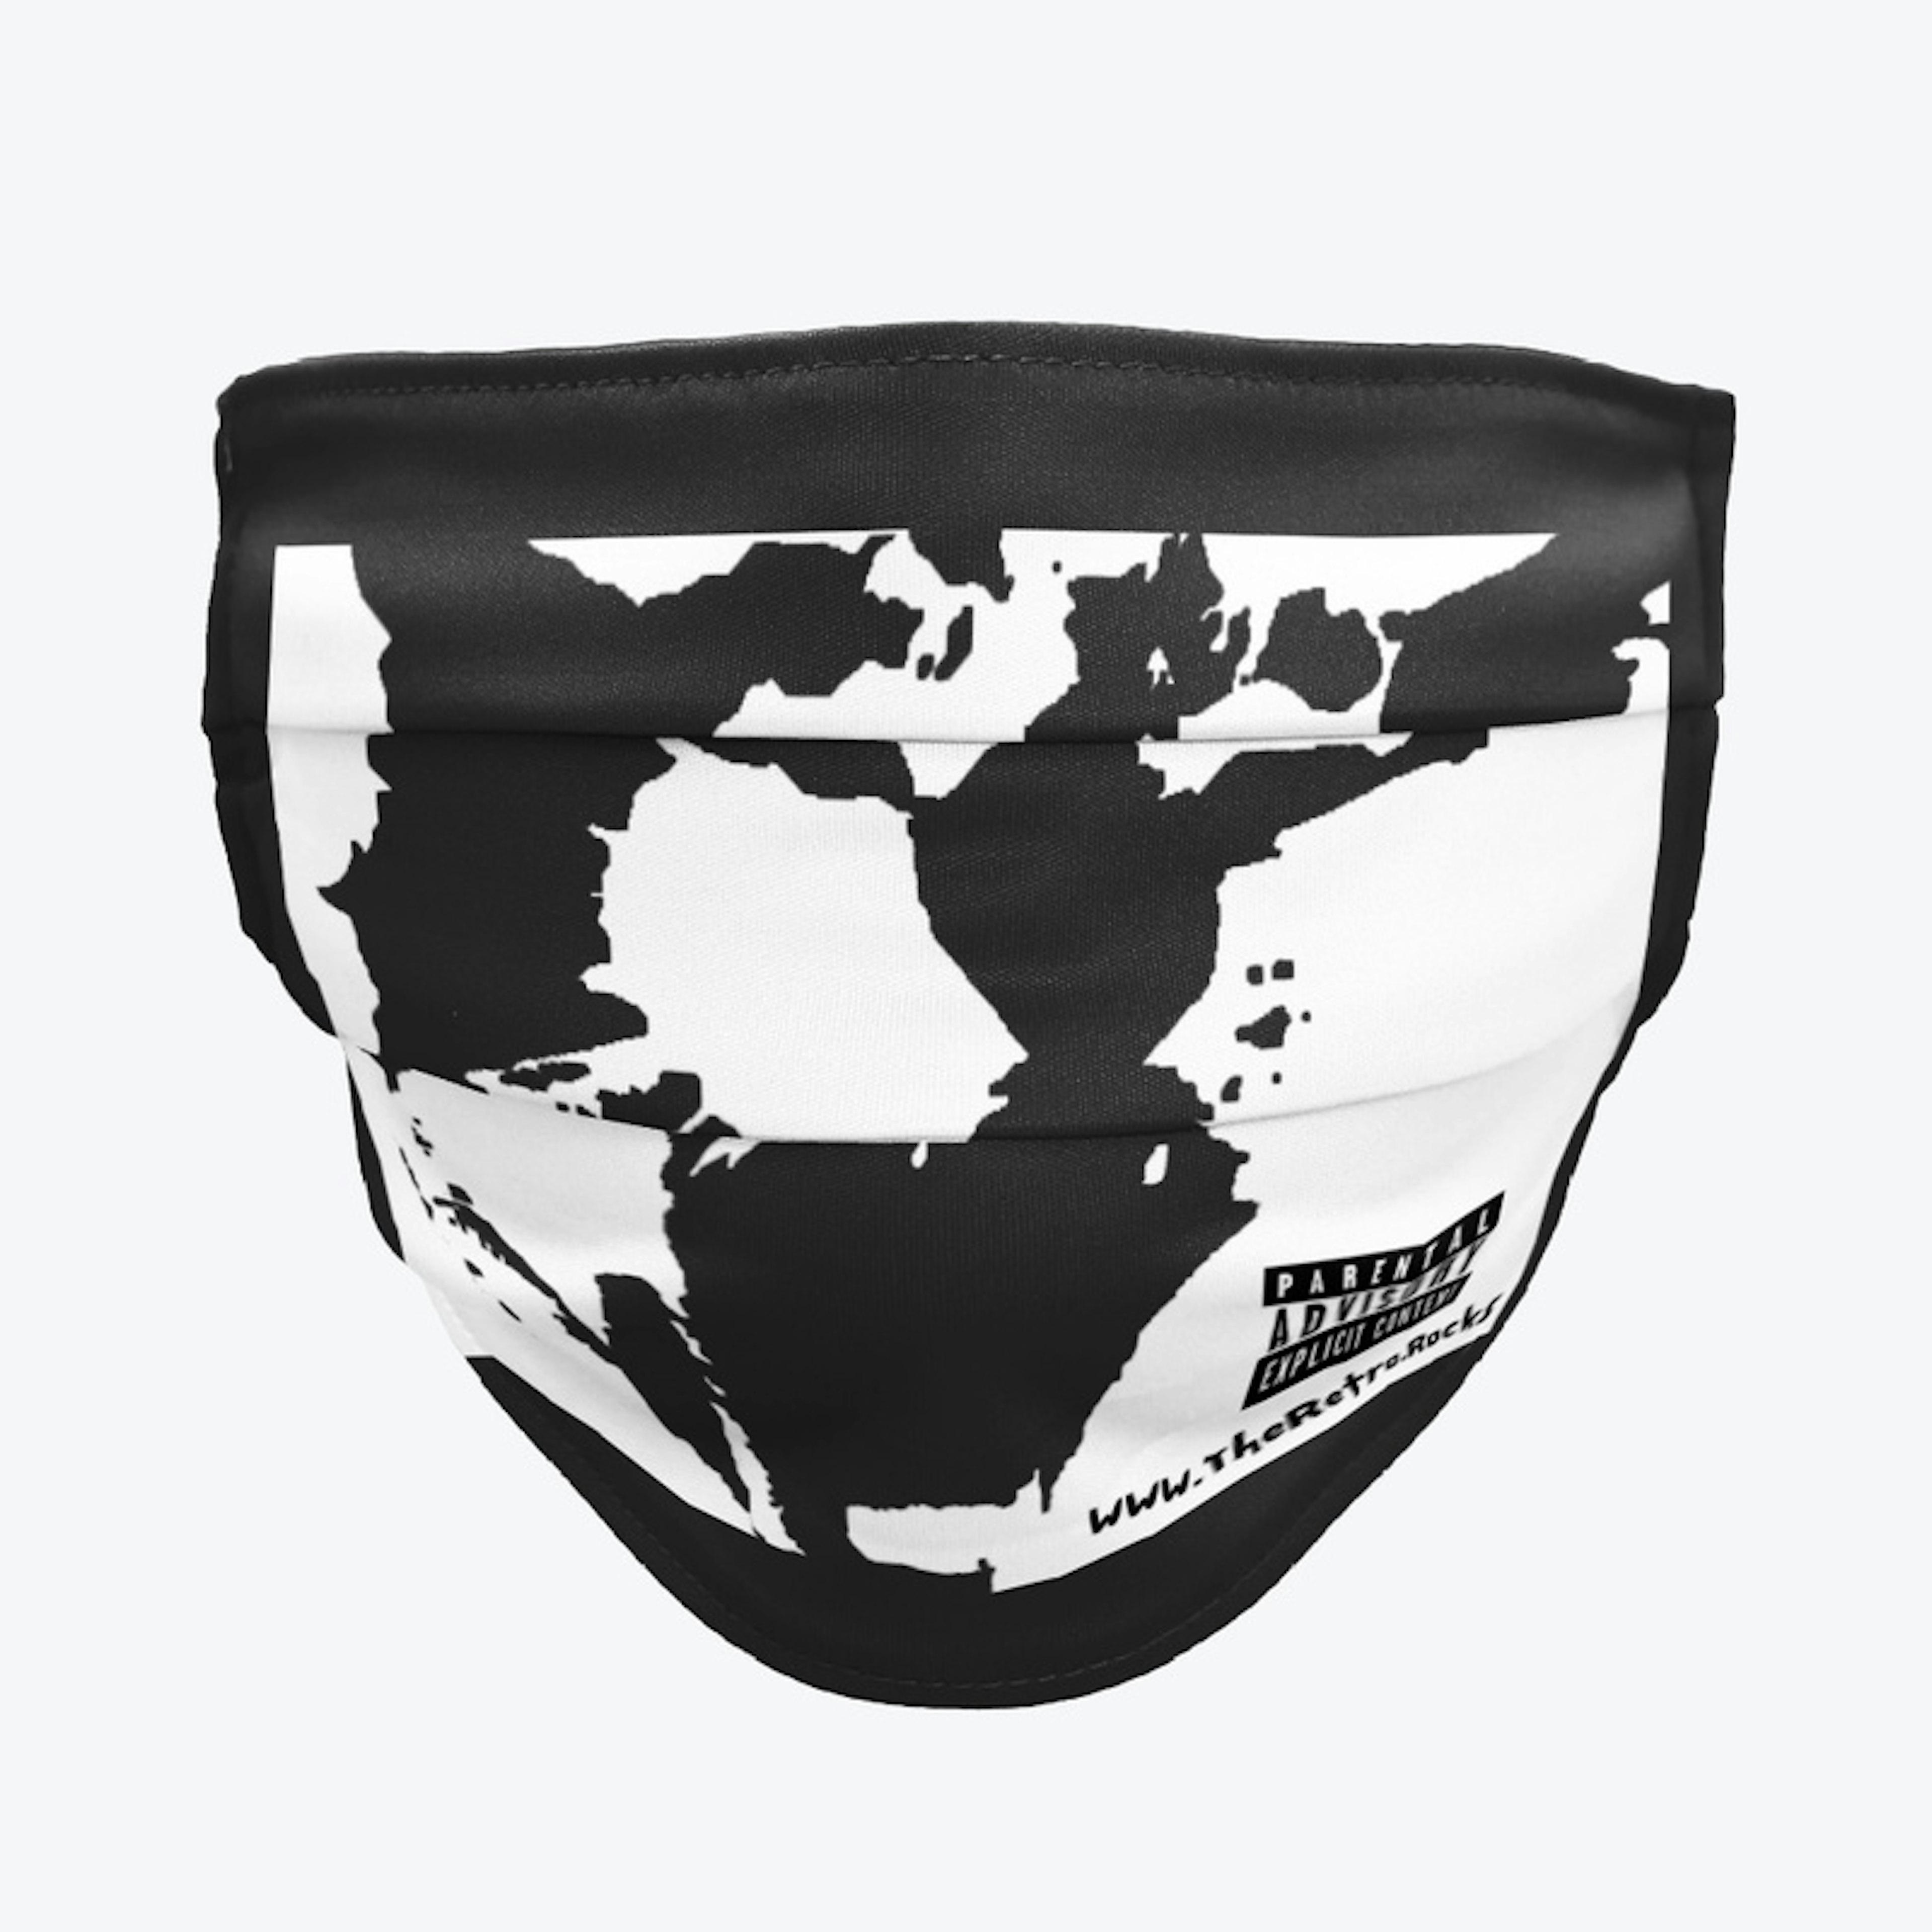 The Retro "Concert Collection" Face Mask